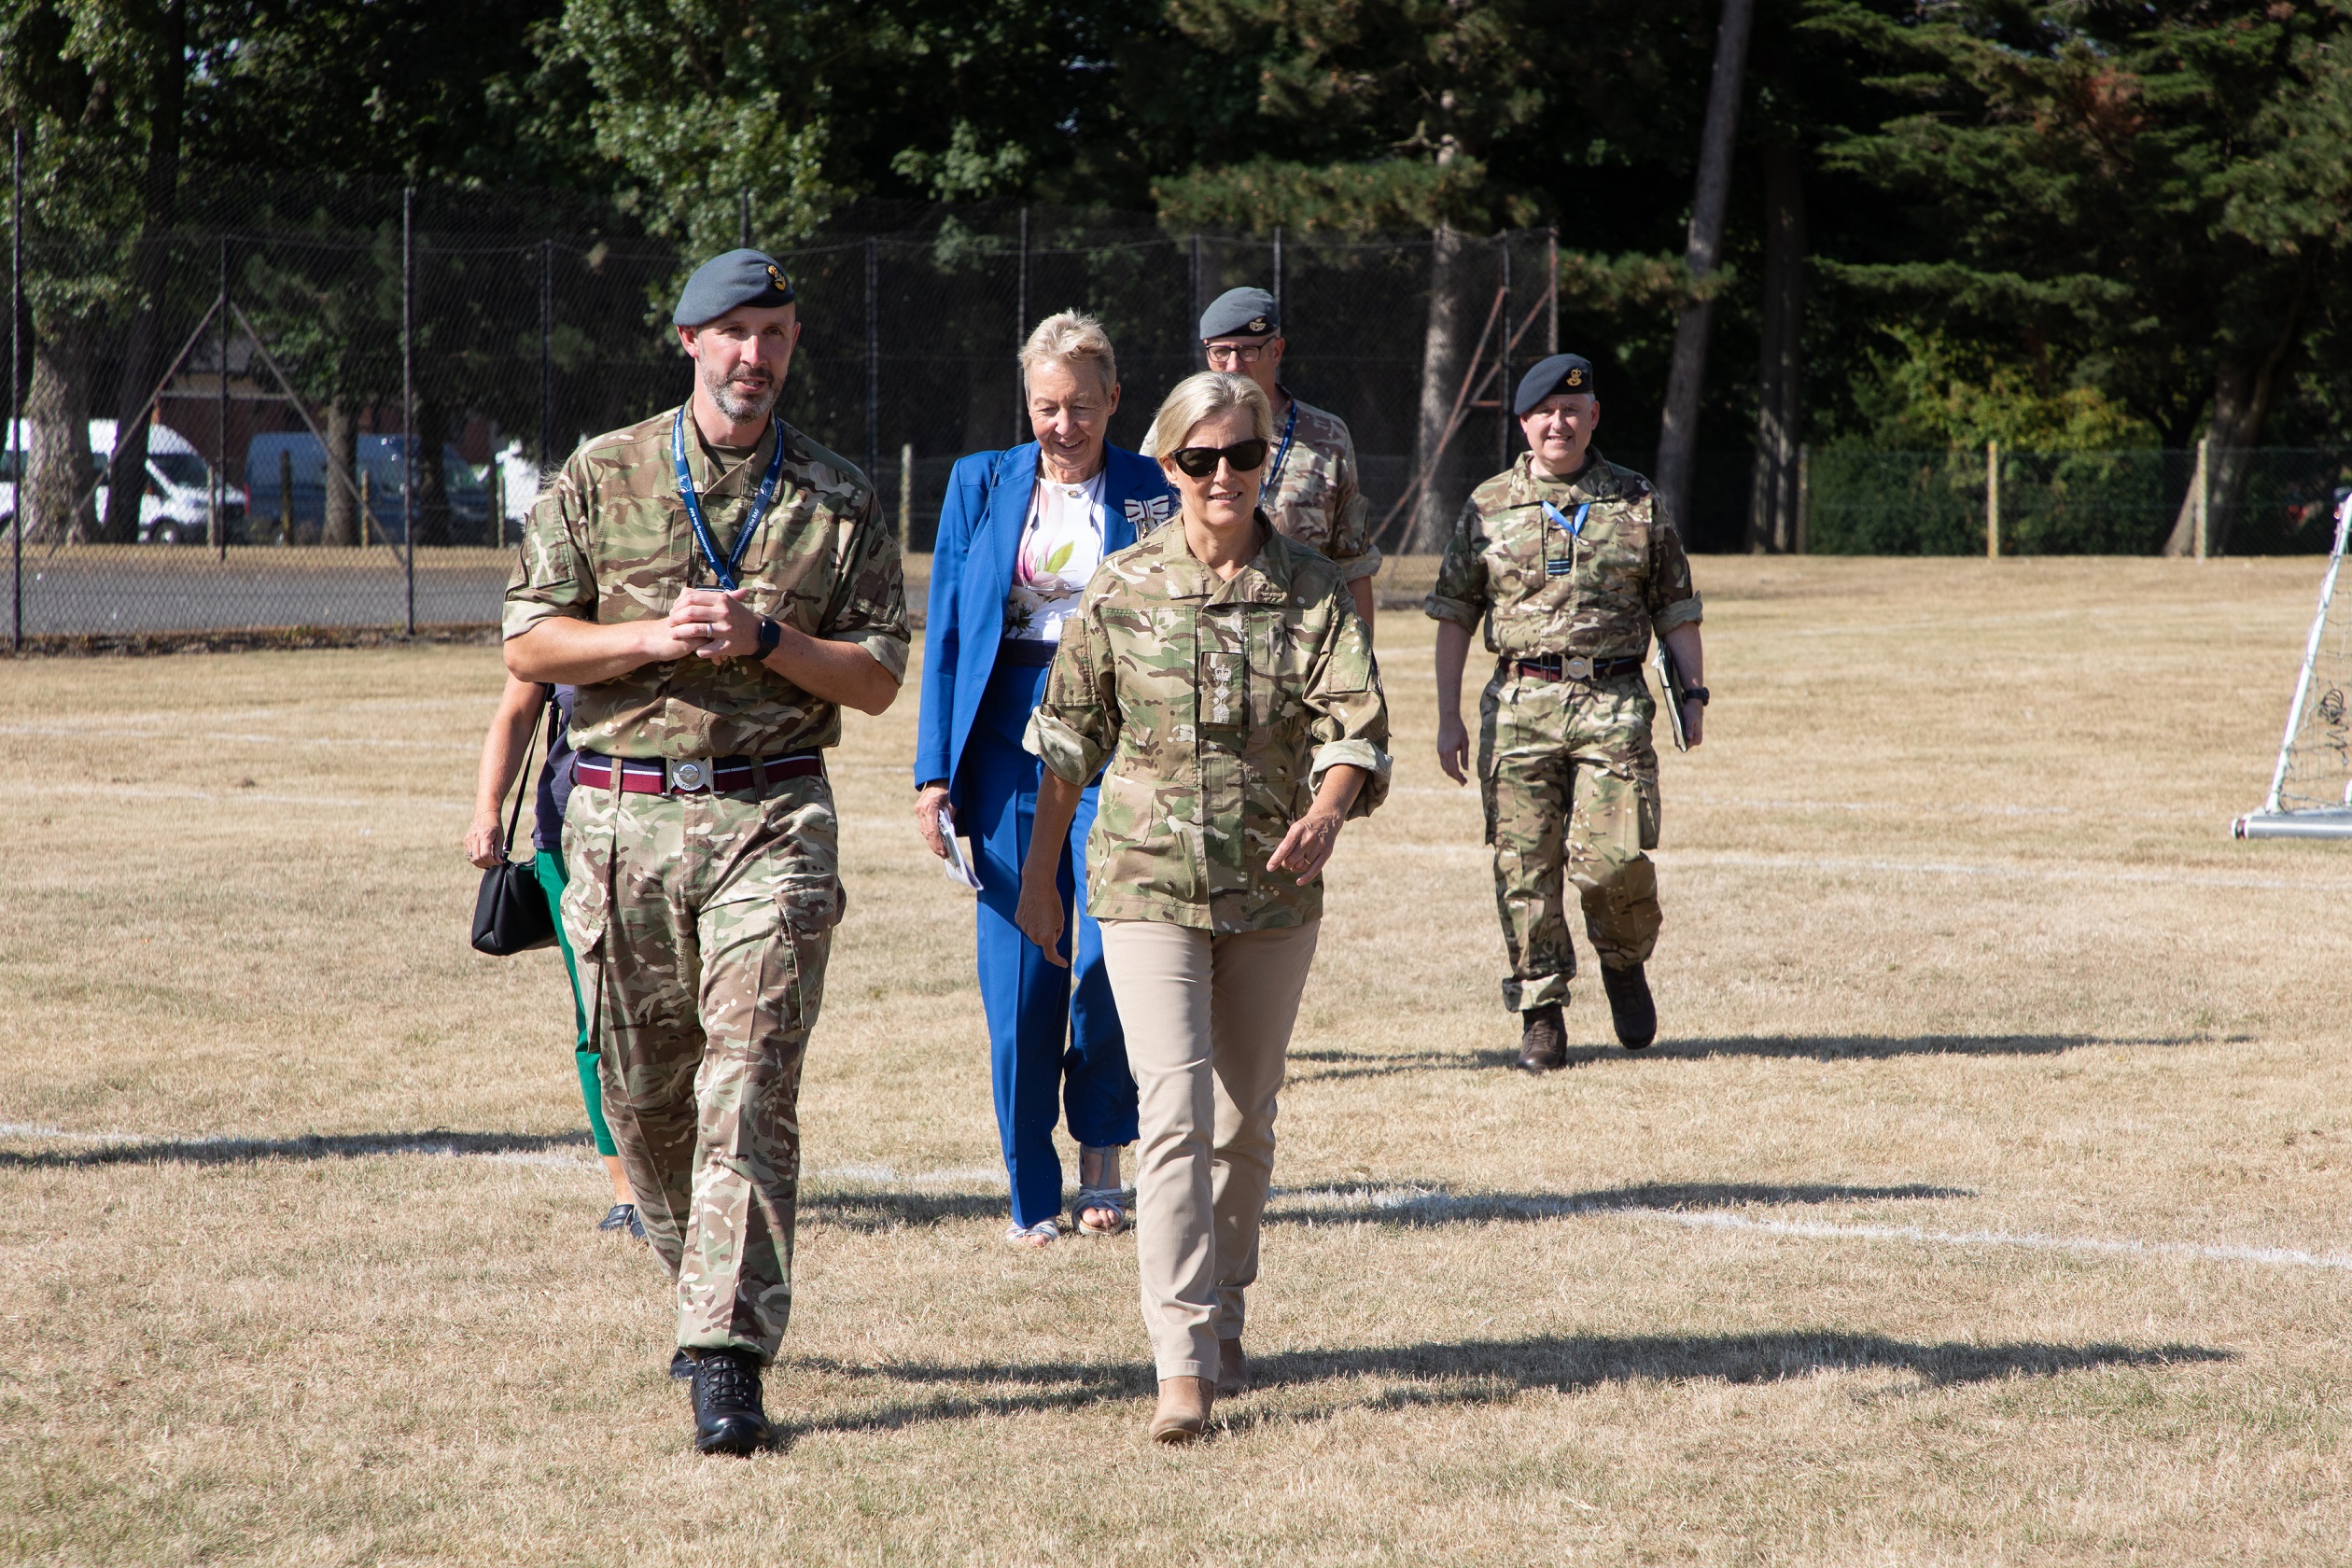 From left to right: Wing Commander Jeremy Case, Mrs Julie Spence, Her Royal Highness The Countess of Wessex.